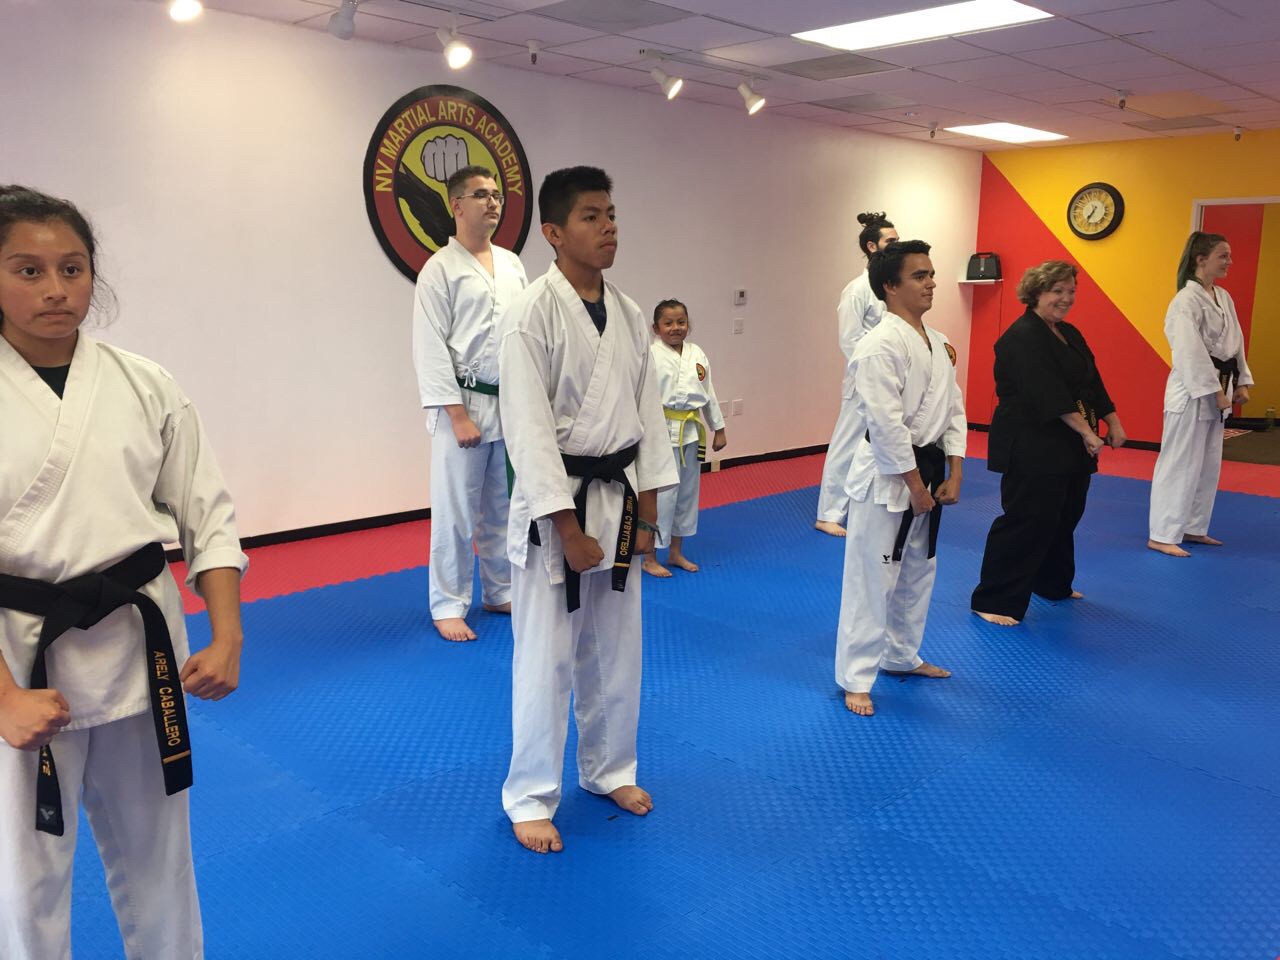 The Top 10 Benefits of Martial Arts on Student's Attitudes